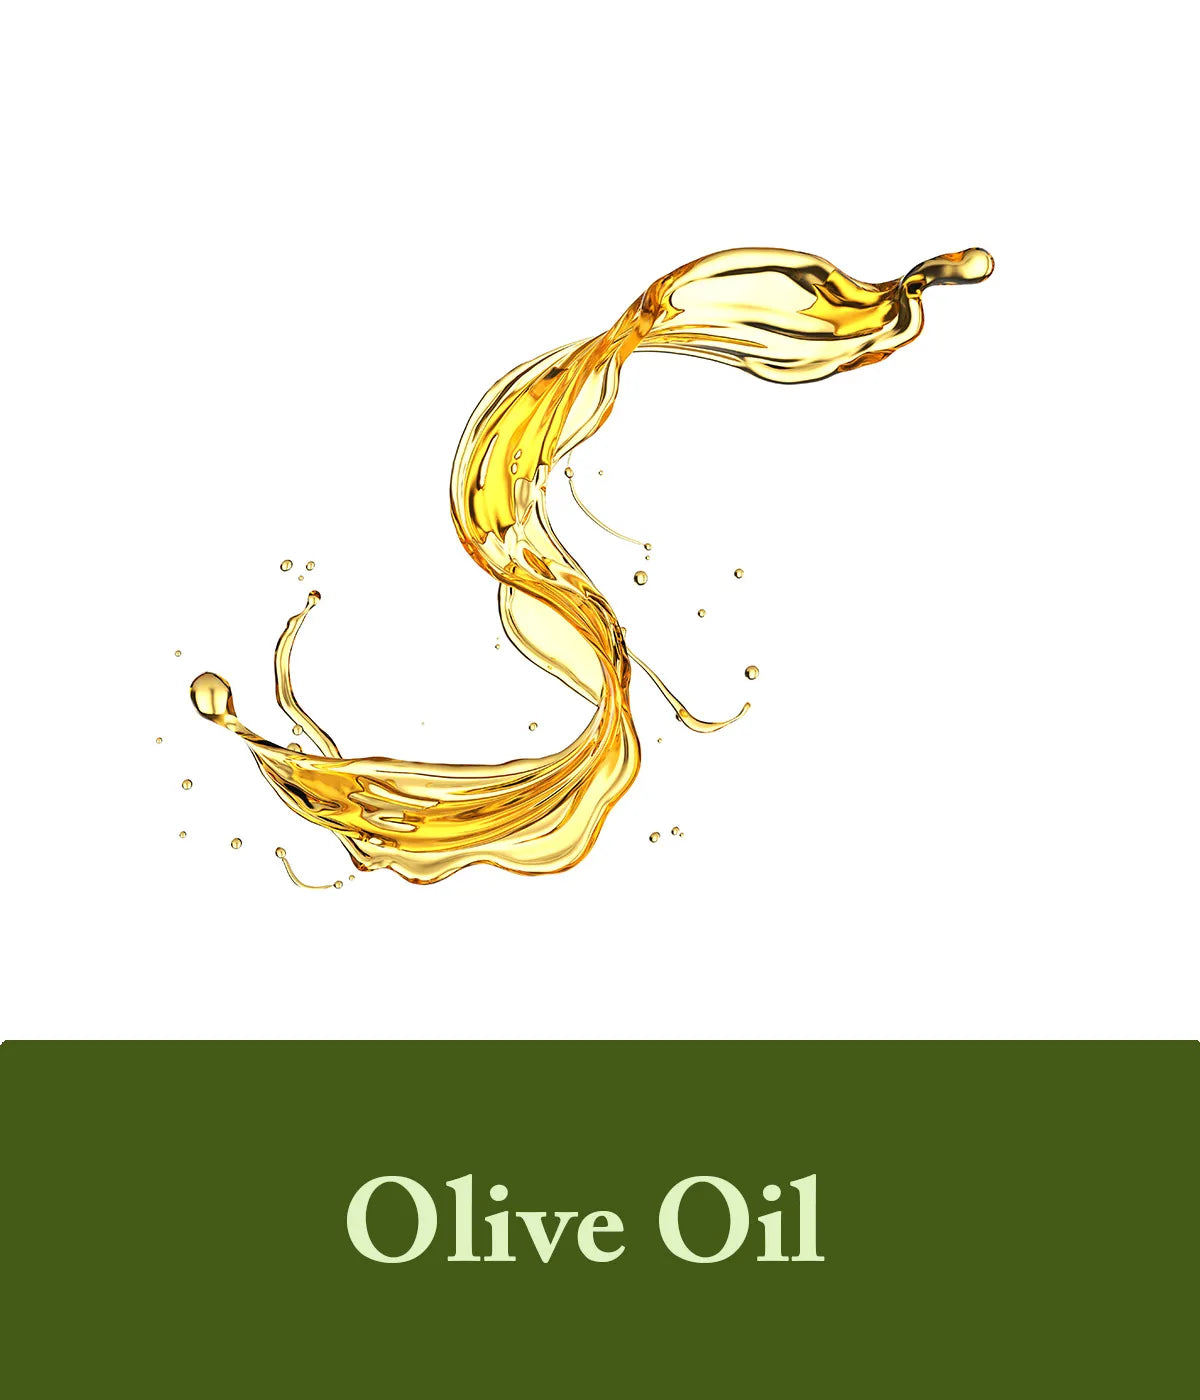 picture of olive oil to depict it as an ingredient in an olive oil shampoo bar from Seek Bamboo